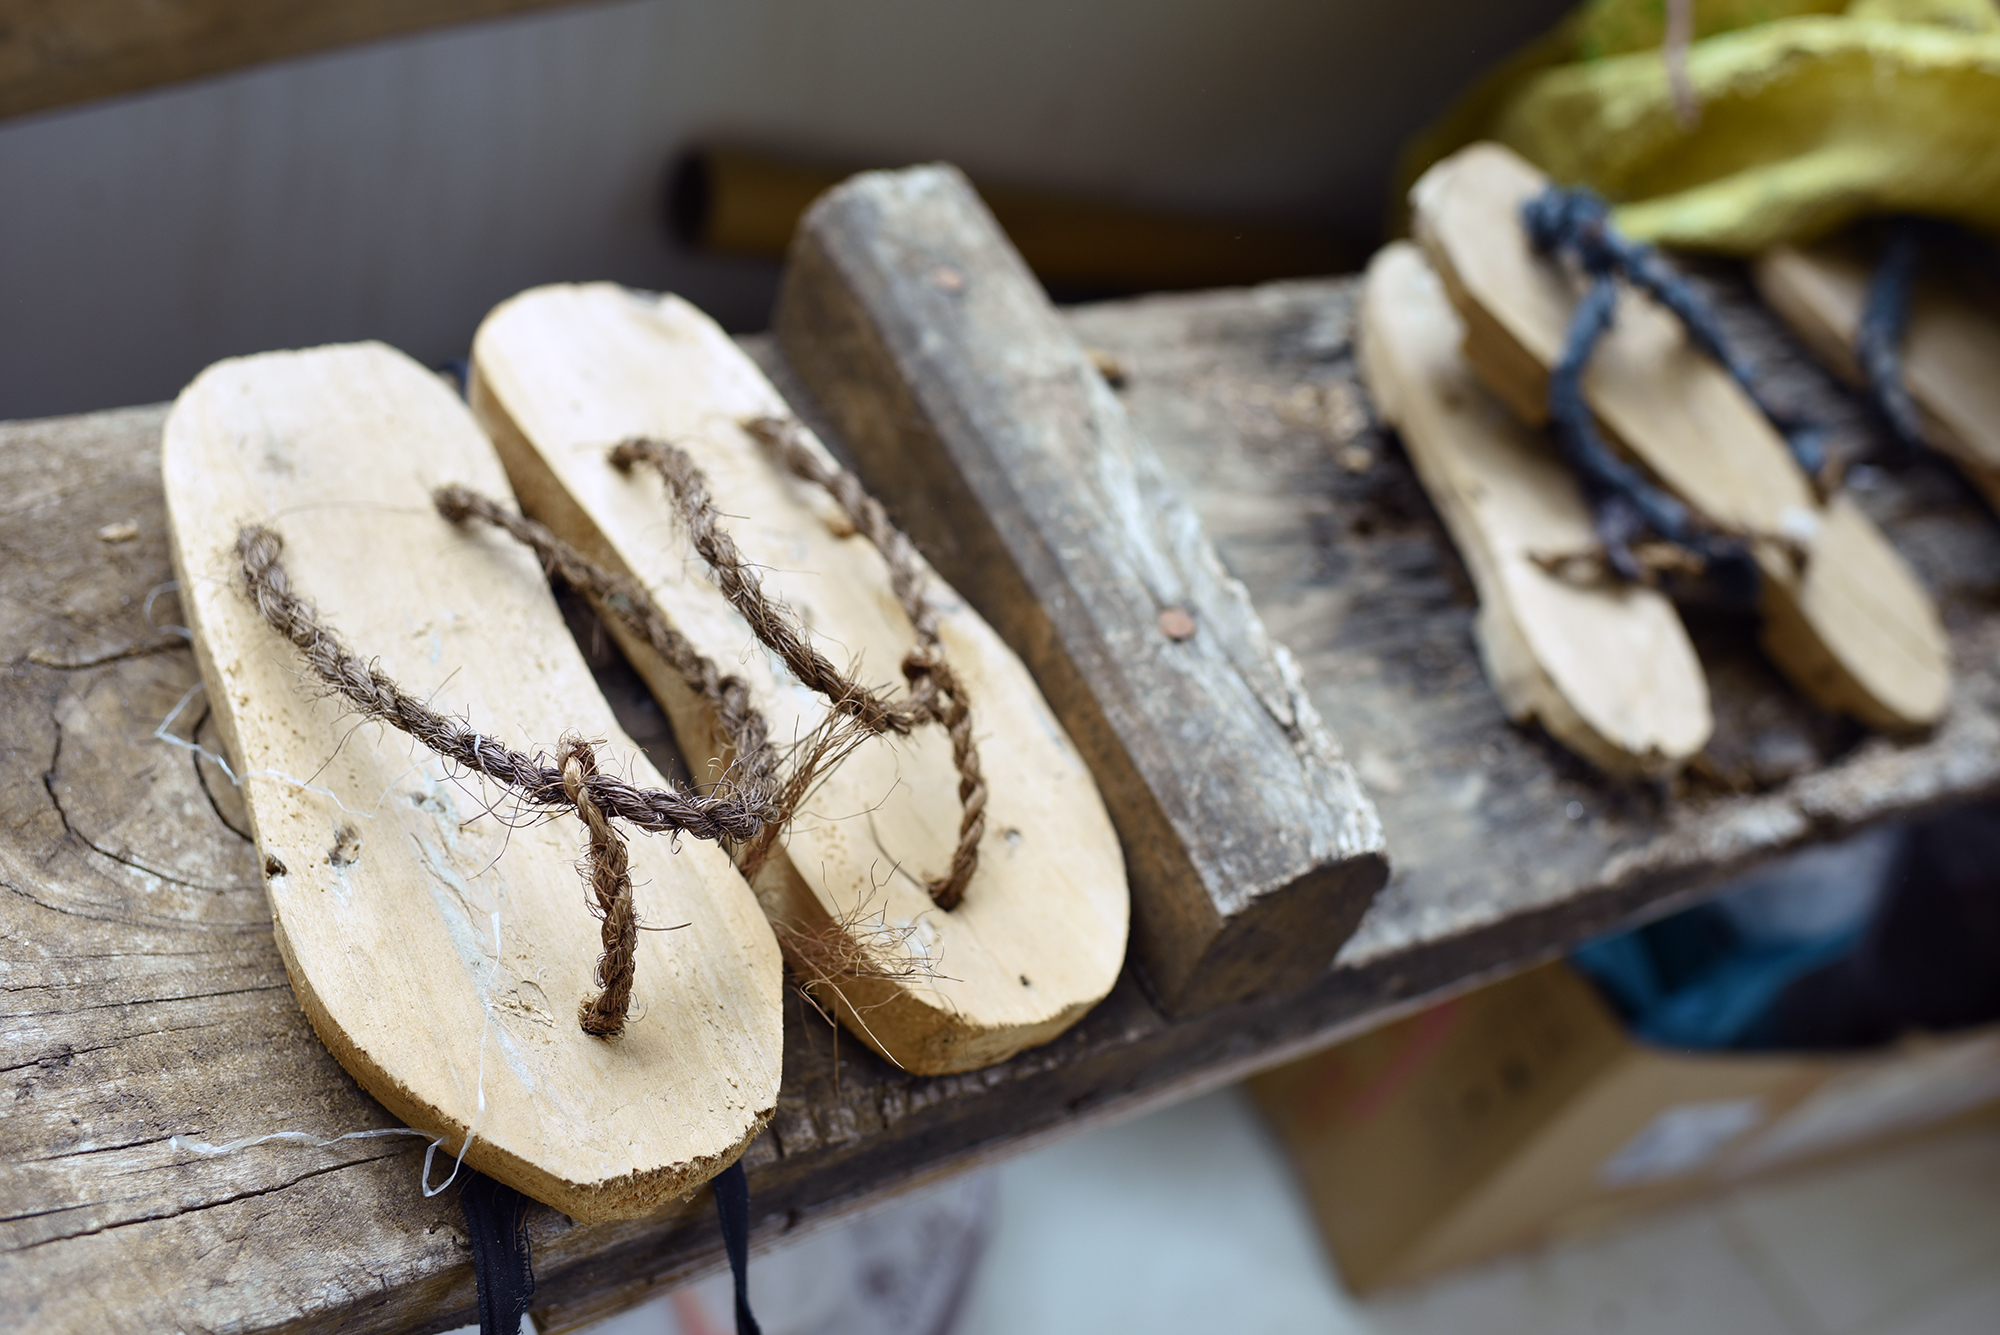  Wooden sandals favored by men involved in intangible cultural heritage musical activities in Yunnan,&nbsp;on display in a small museum in Dayangjie town, 2017. 